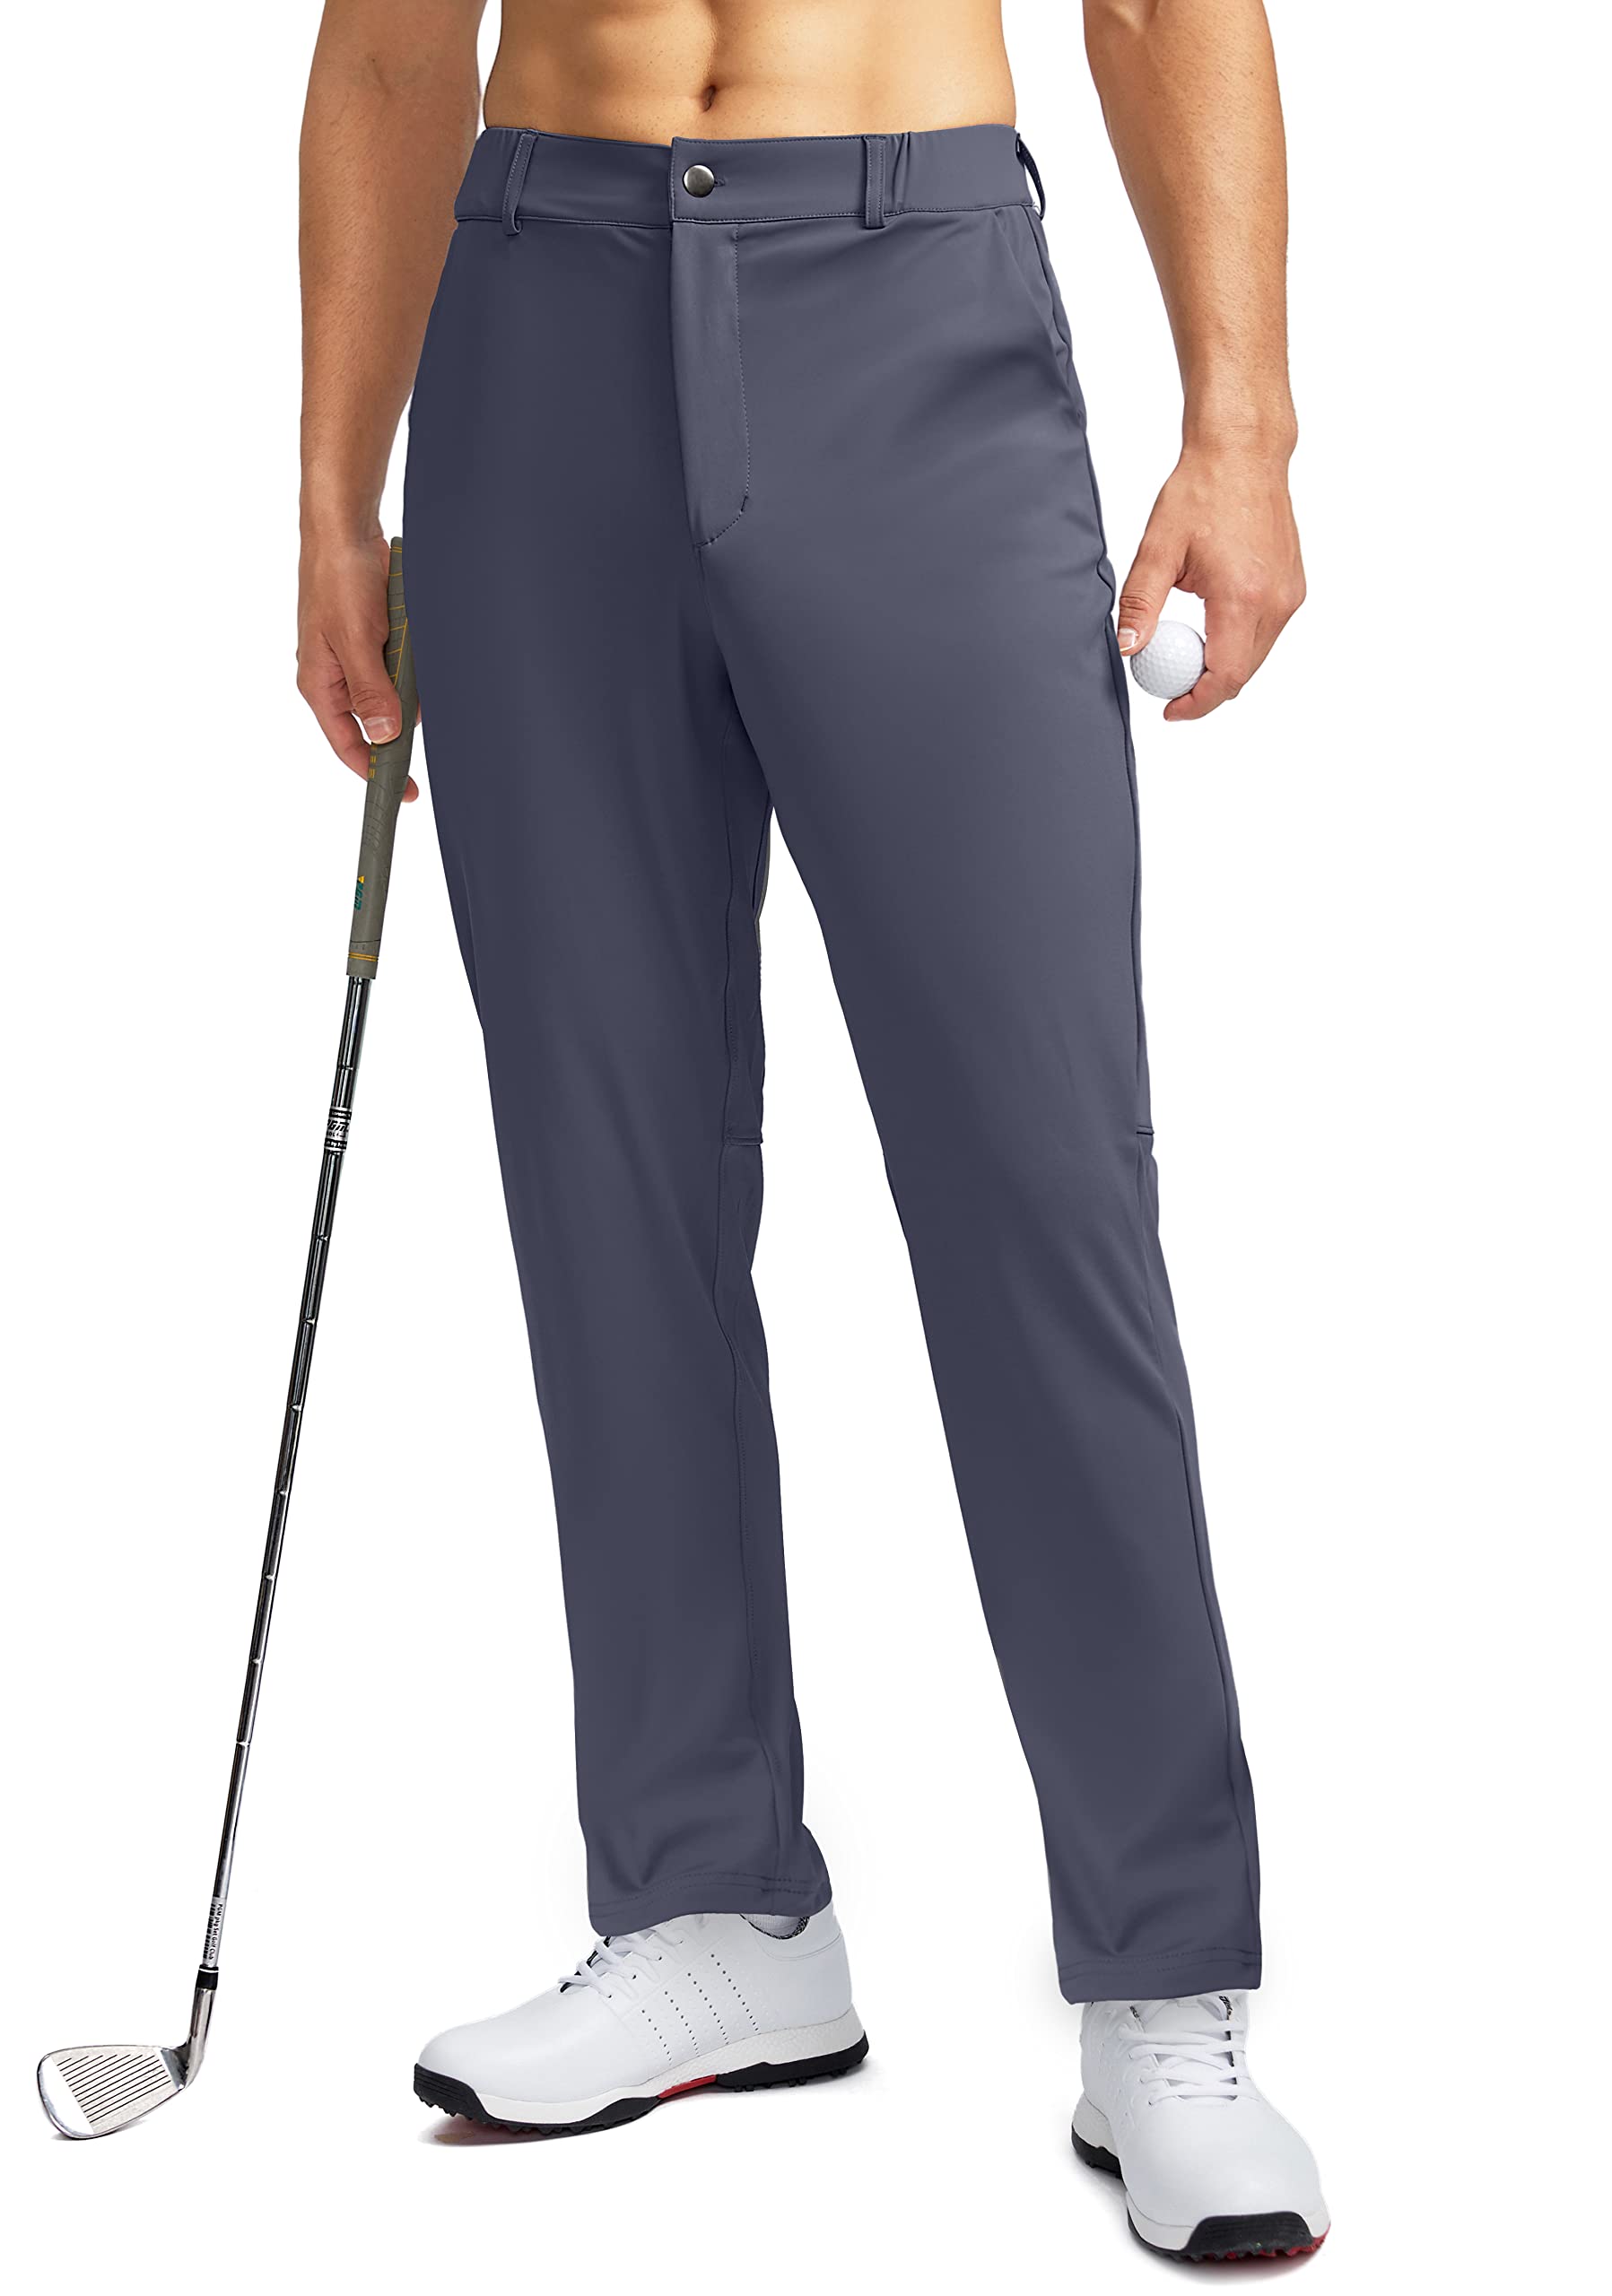 Soothfeel Men's Golf Pants with 5 Pockets Slim Fit Stretch